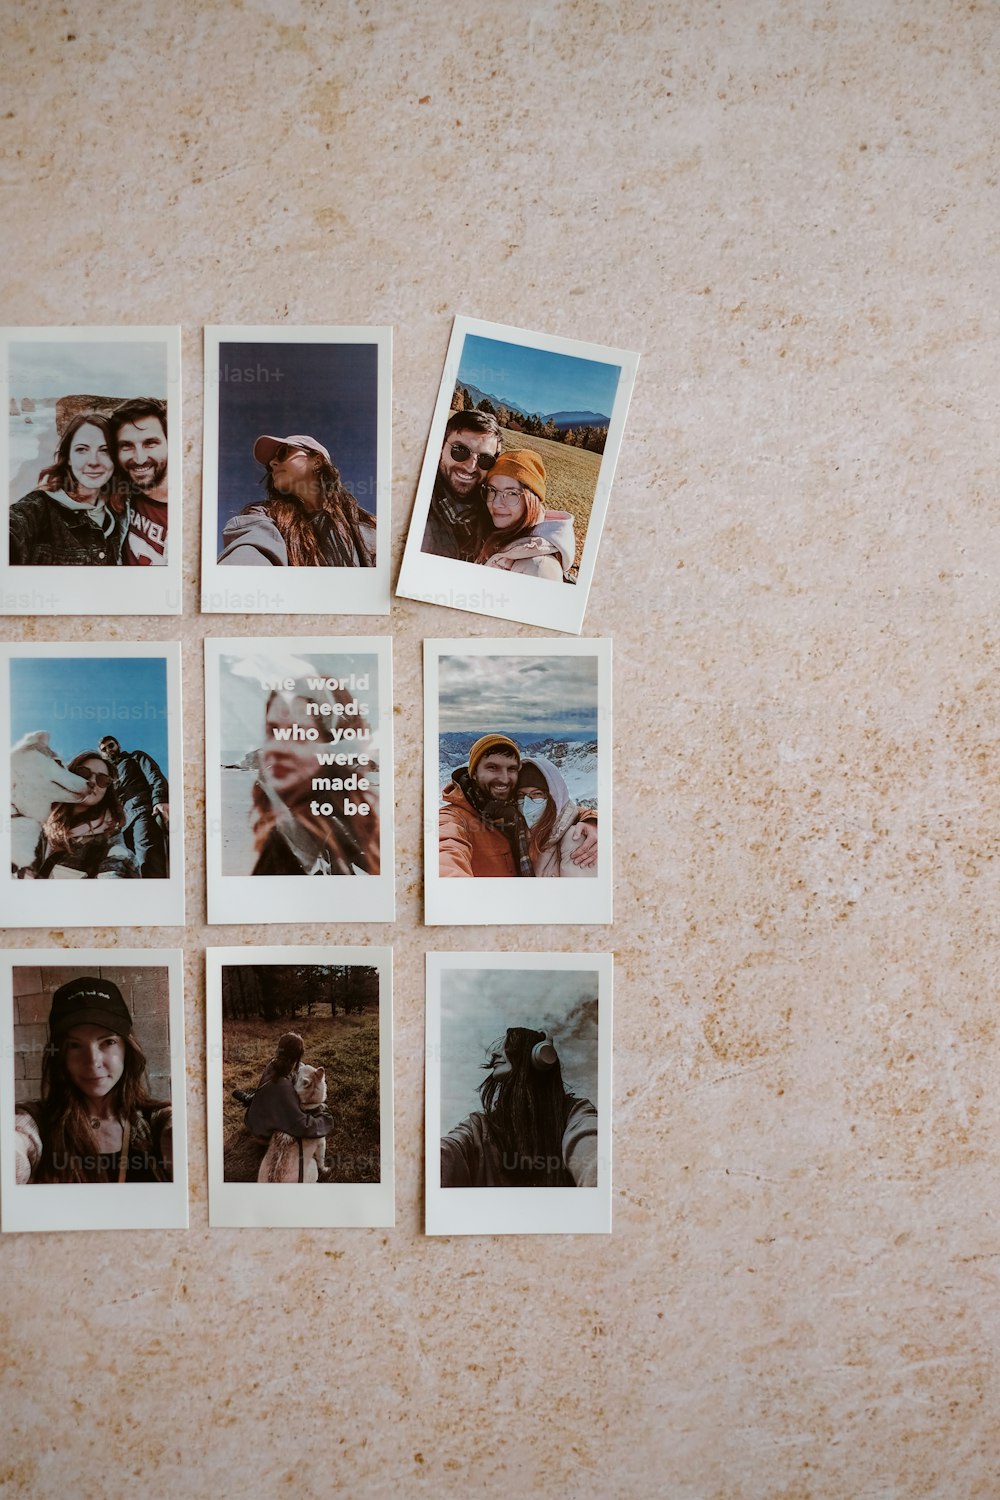 a group of polaroid pictures of a man and a woman